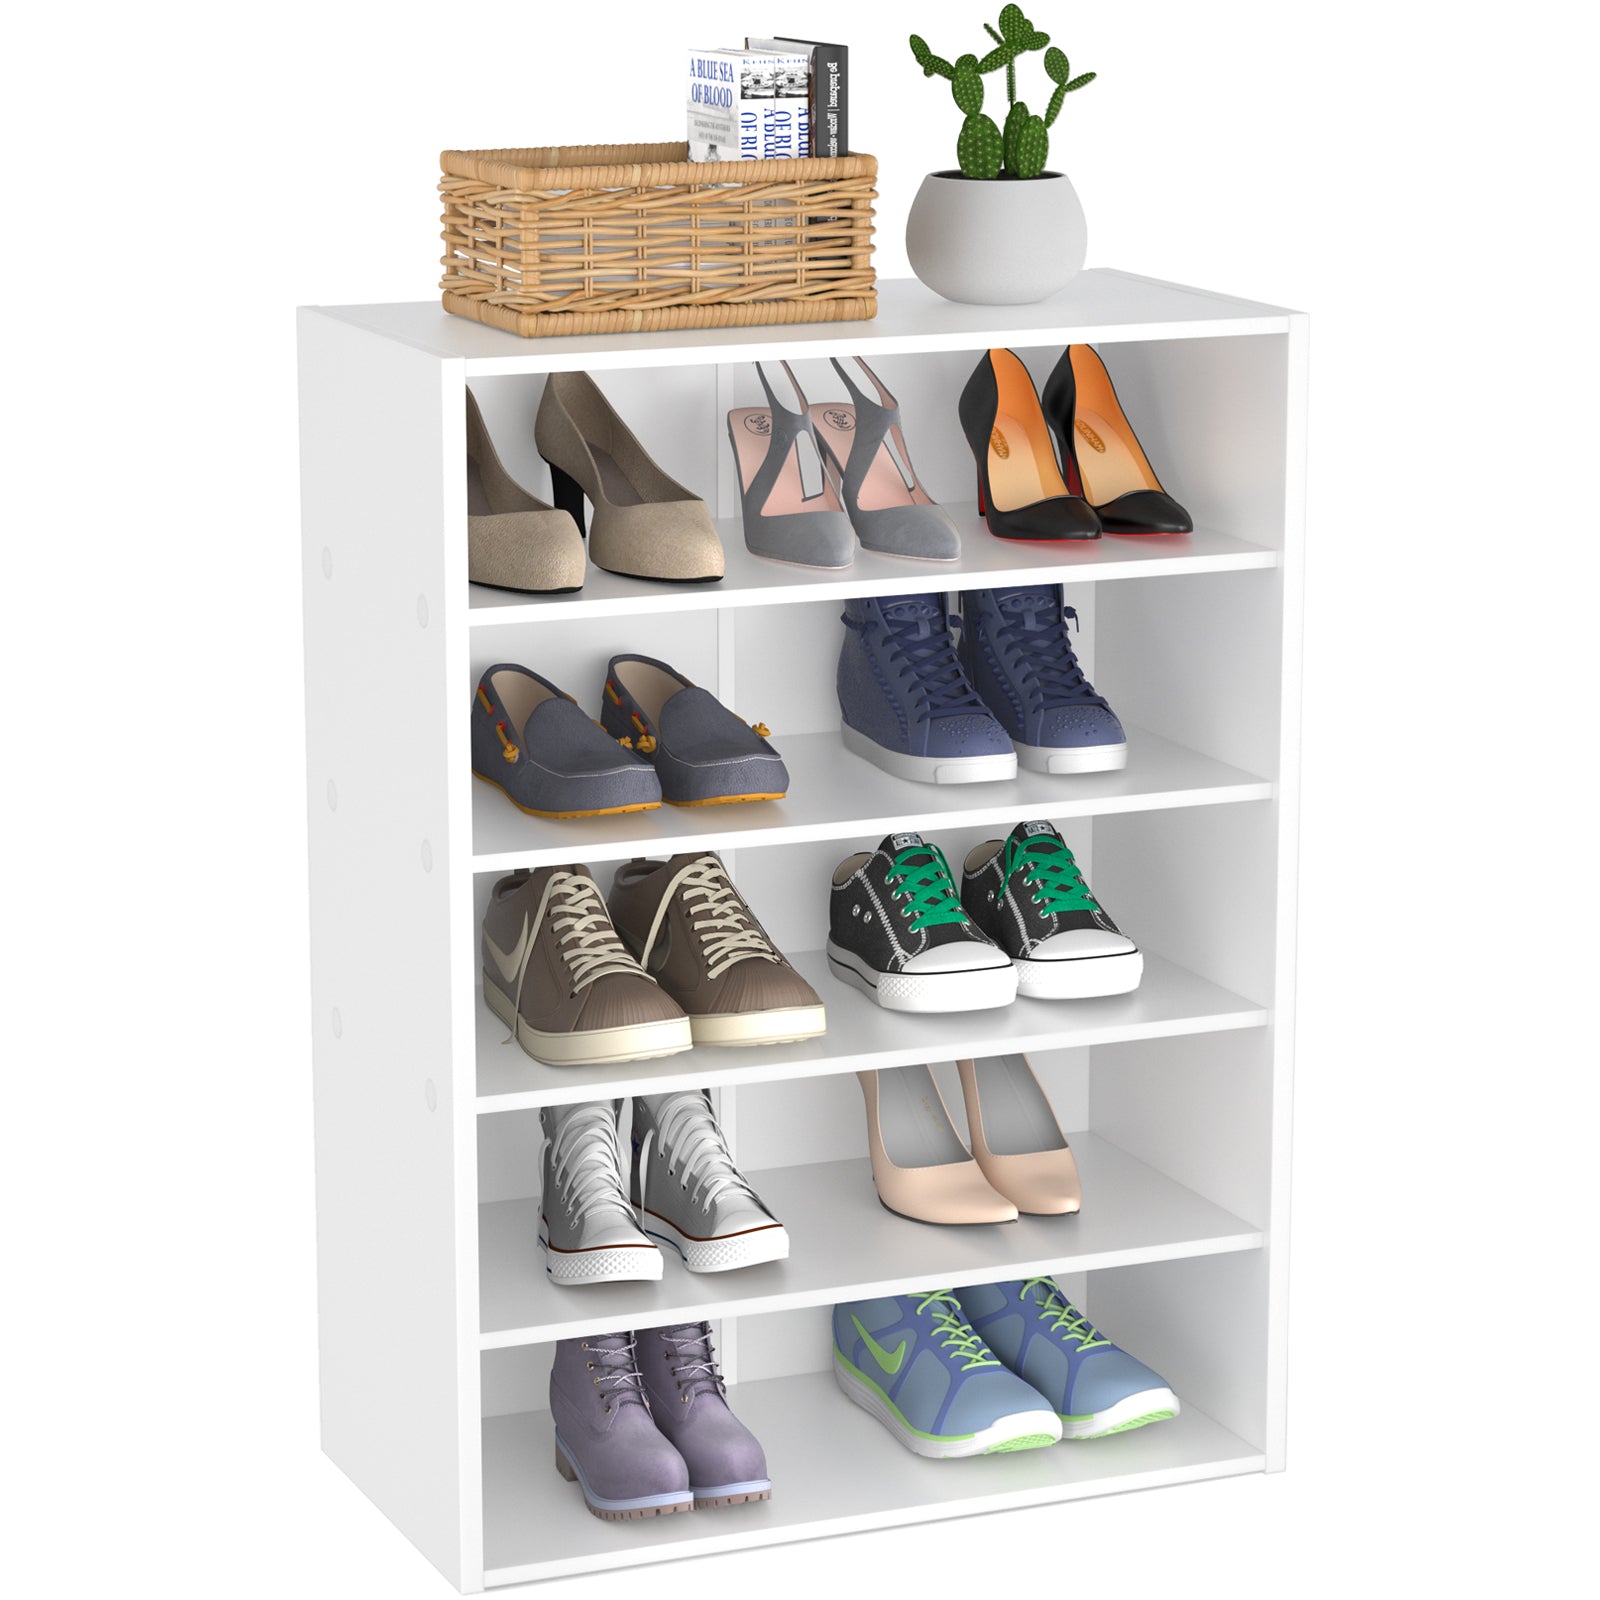 Auhafaly 2-Tier Boot and Shoe Organizer